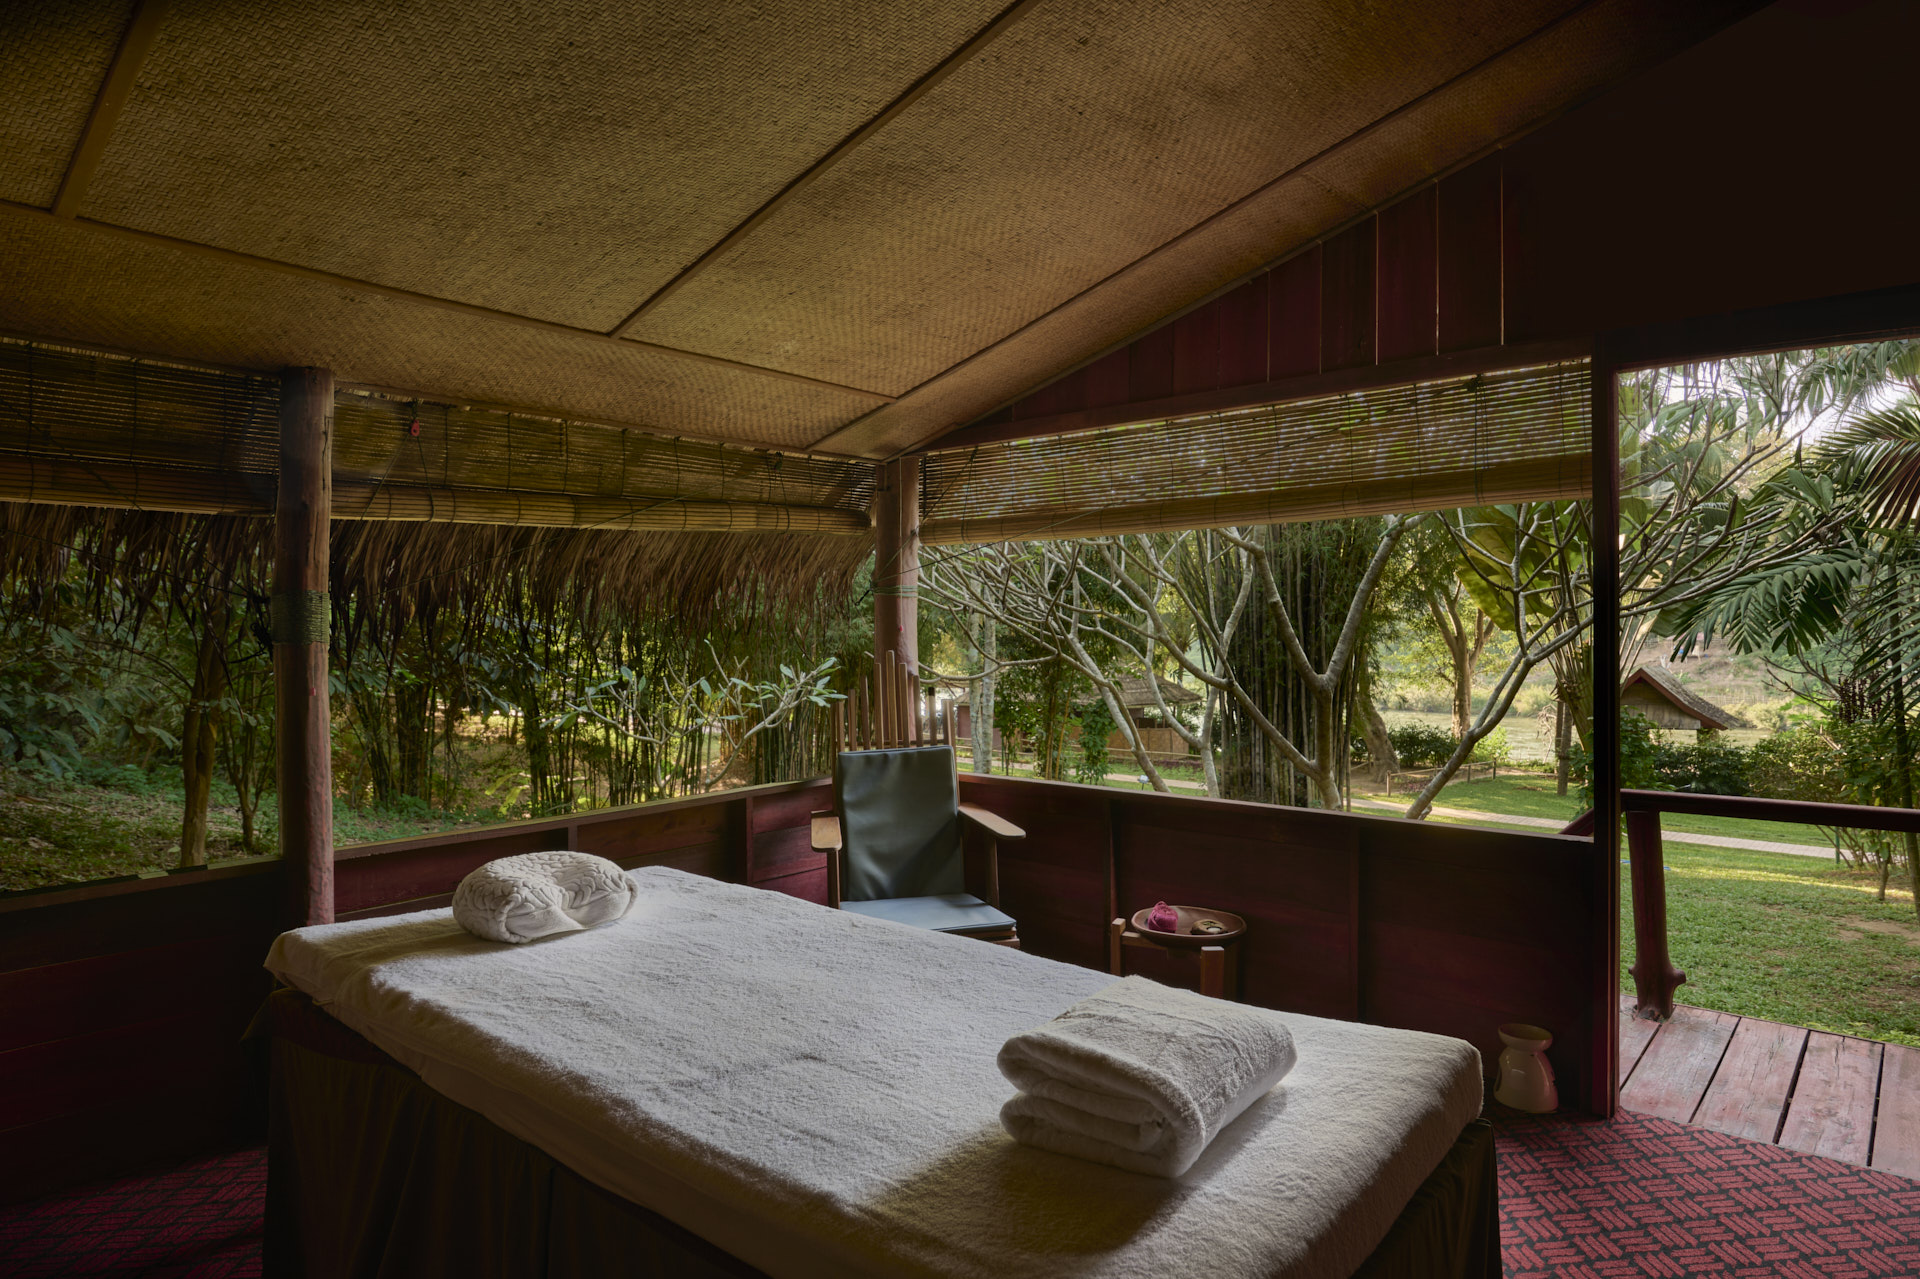 Interior of a tranquil spa room with a massage table, folded towels, and a lush Namkhan garden view through bamboo blinds in Luang Prabang.